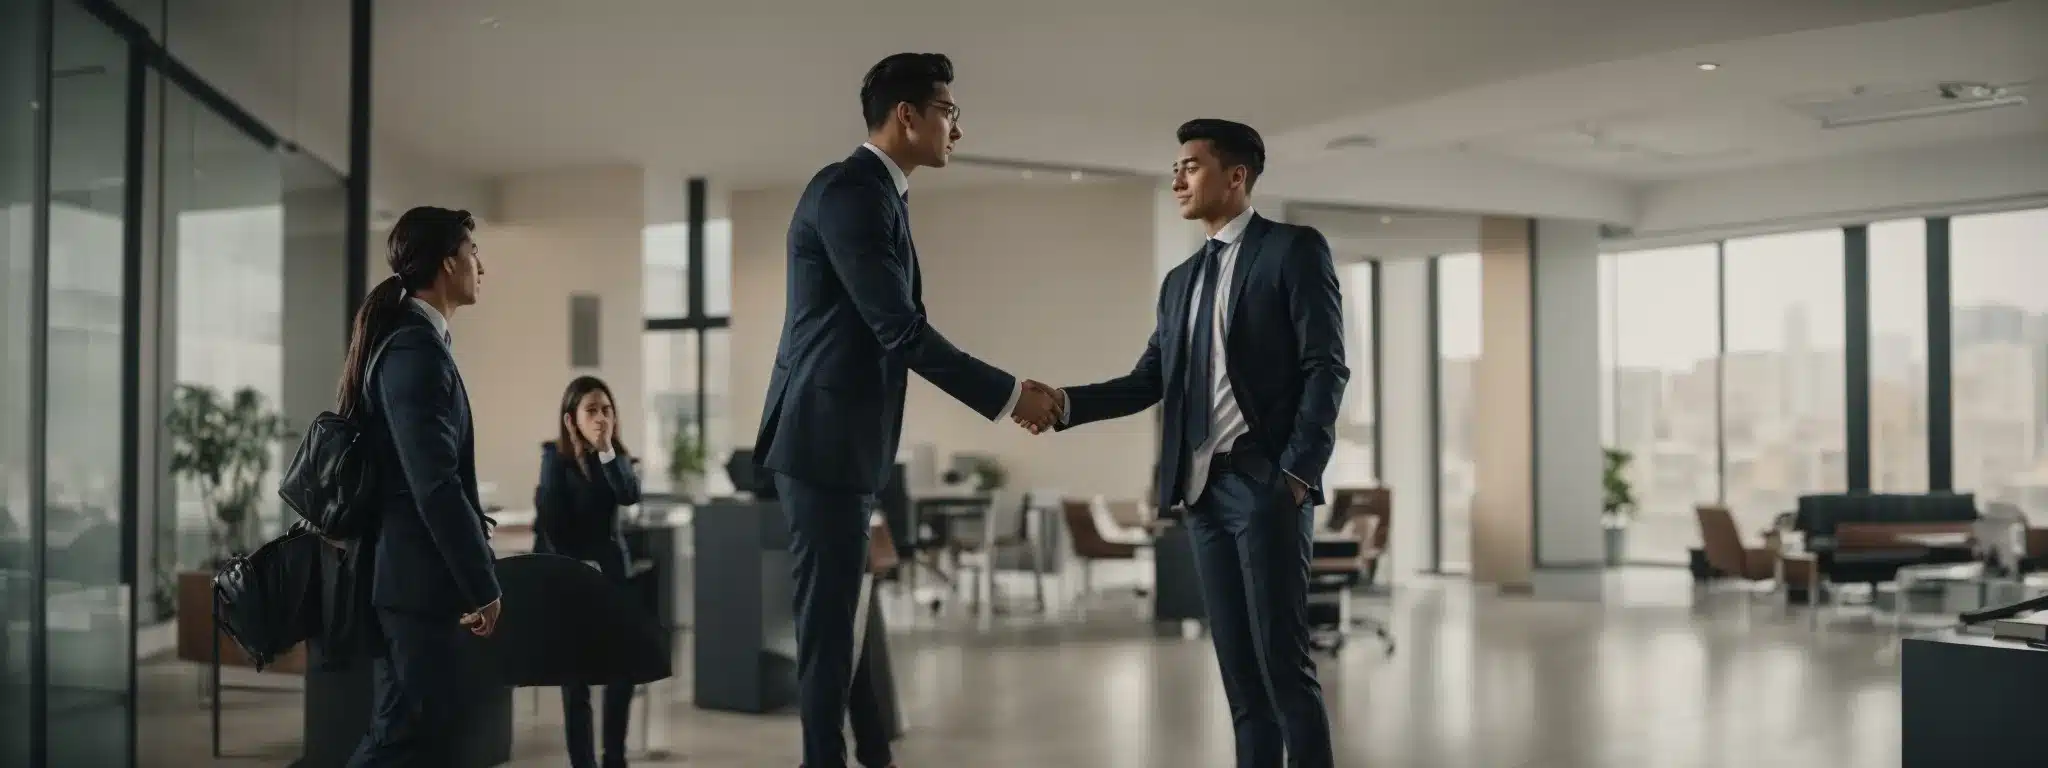 An Influencer And Brand Representative Shaking Hands In A Bright, Modern Office, Symbolizing A Partnership.